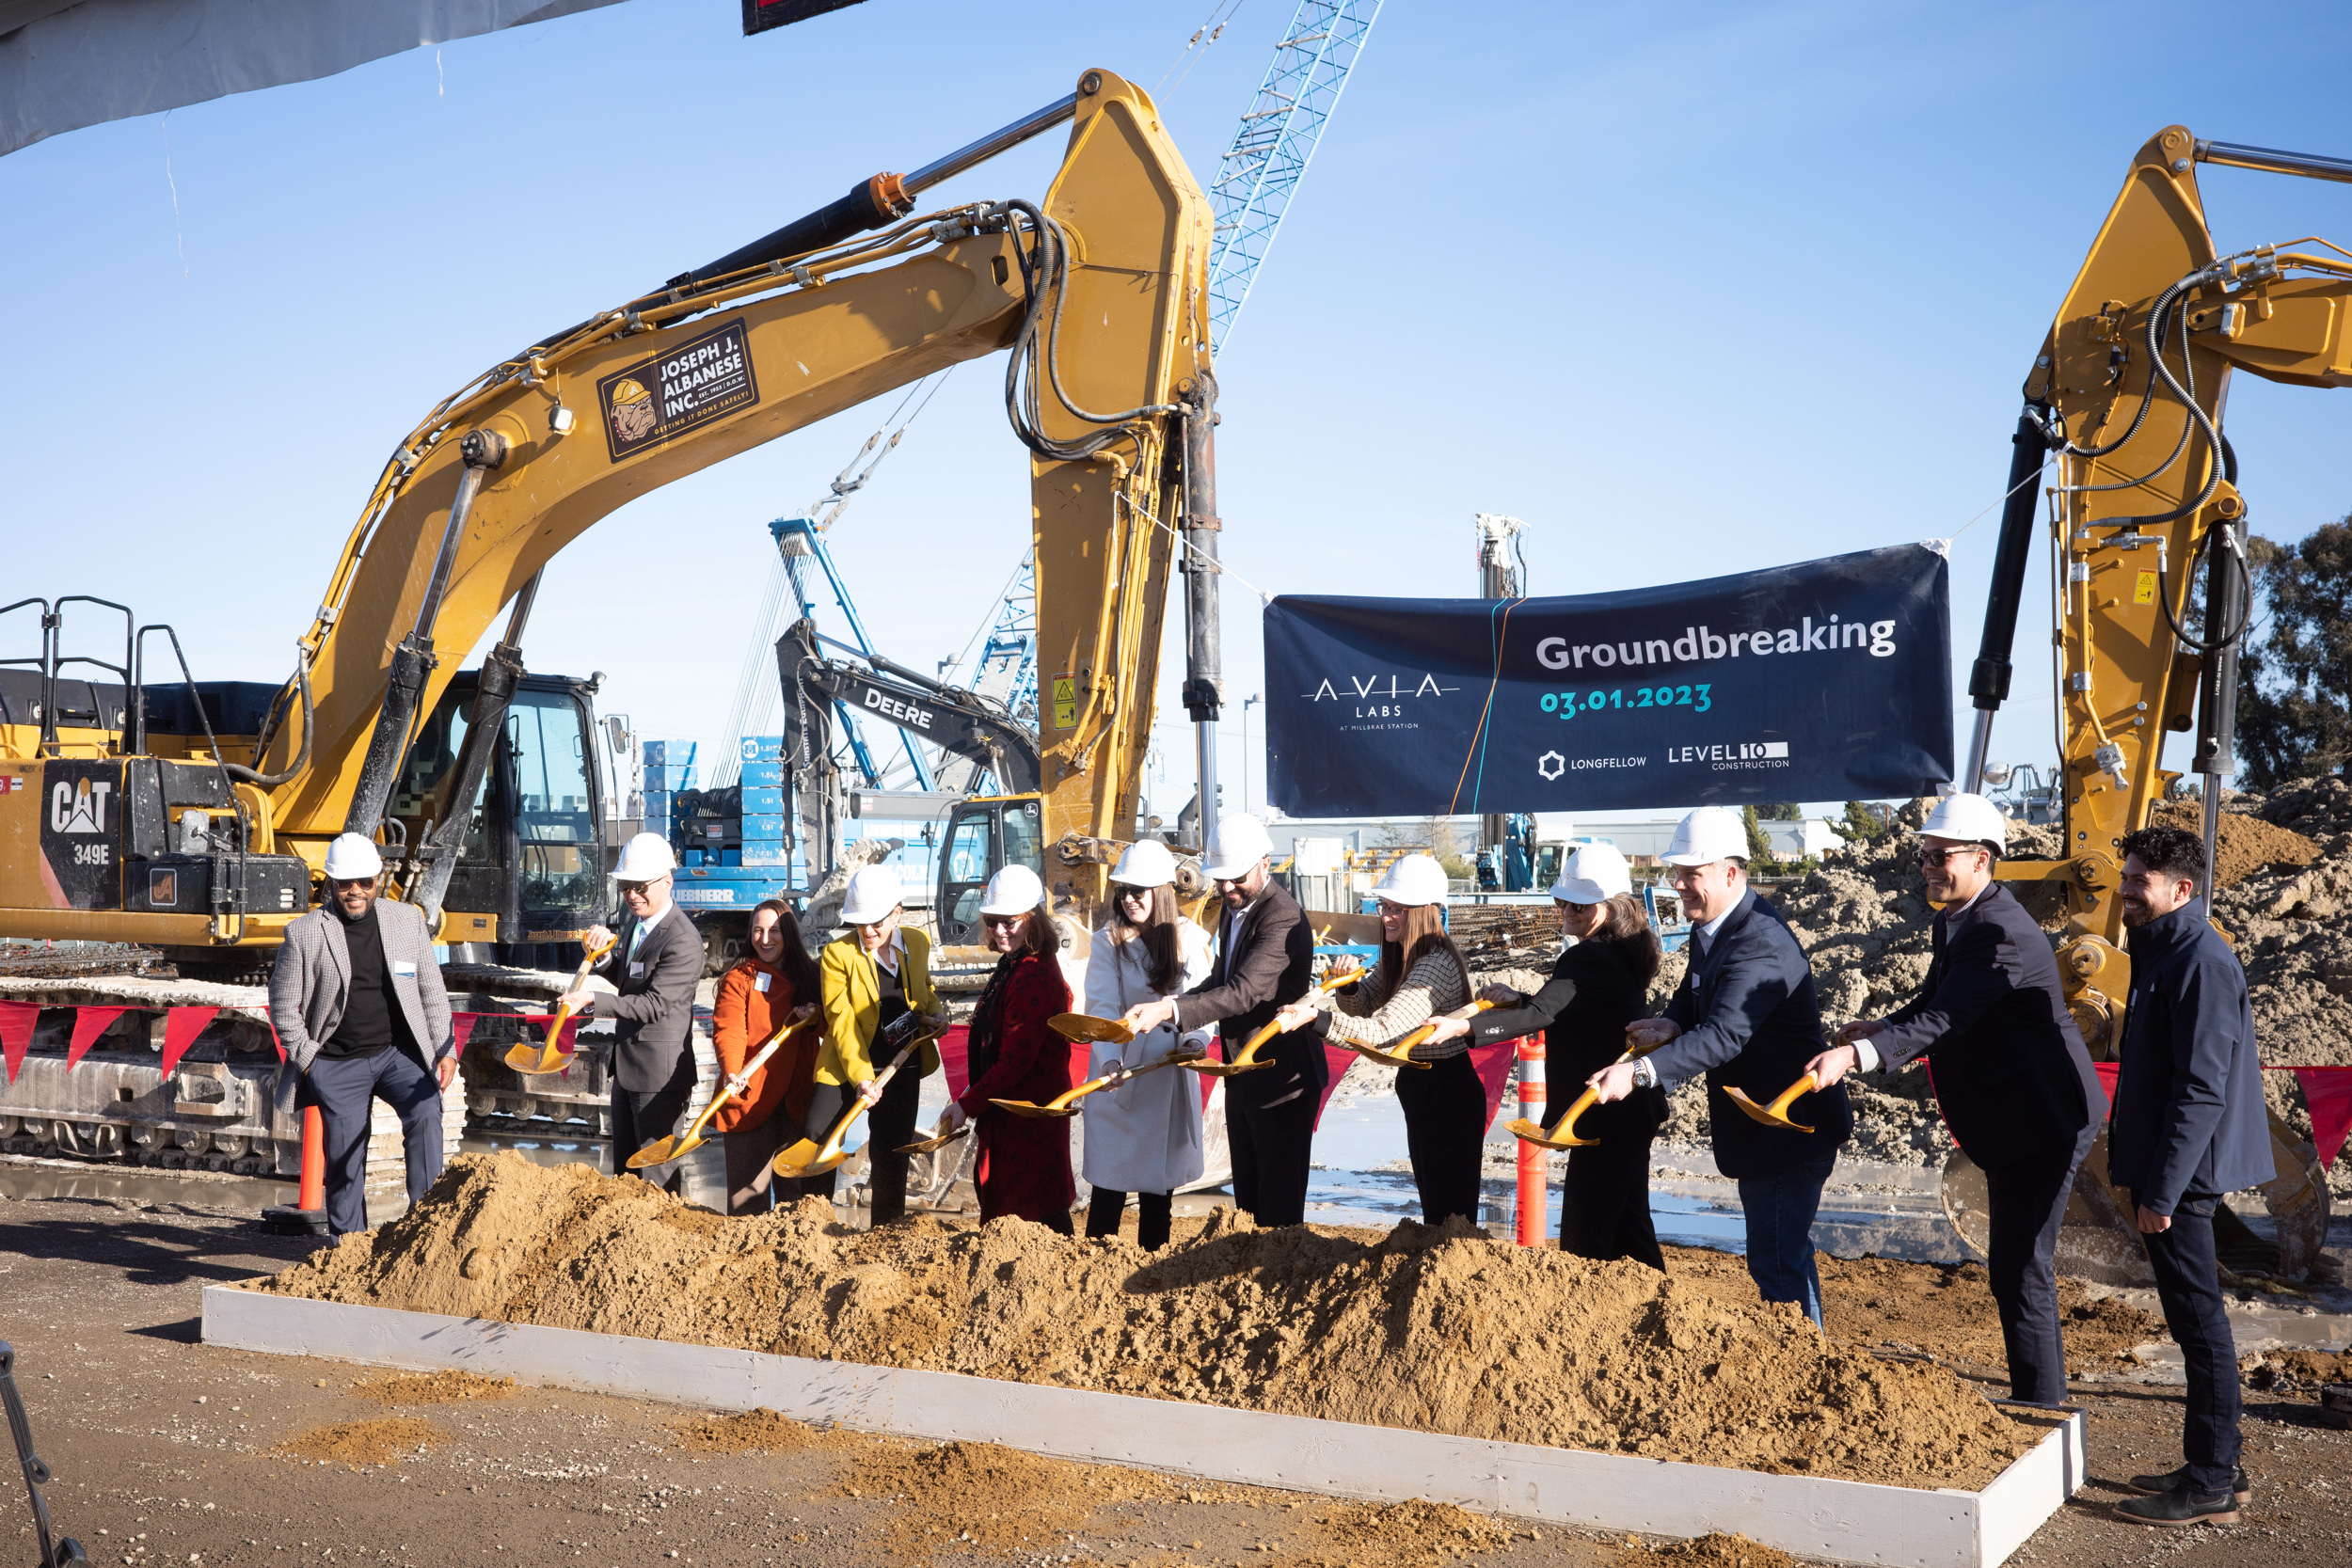 Avia Labs Groundbreaking, image by author